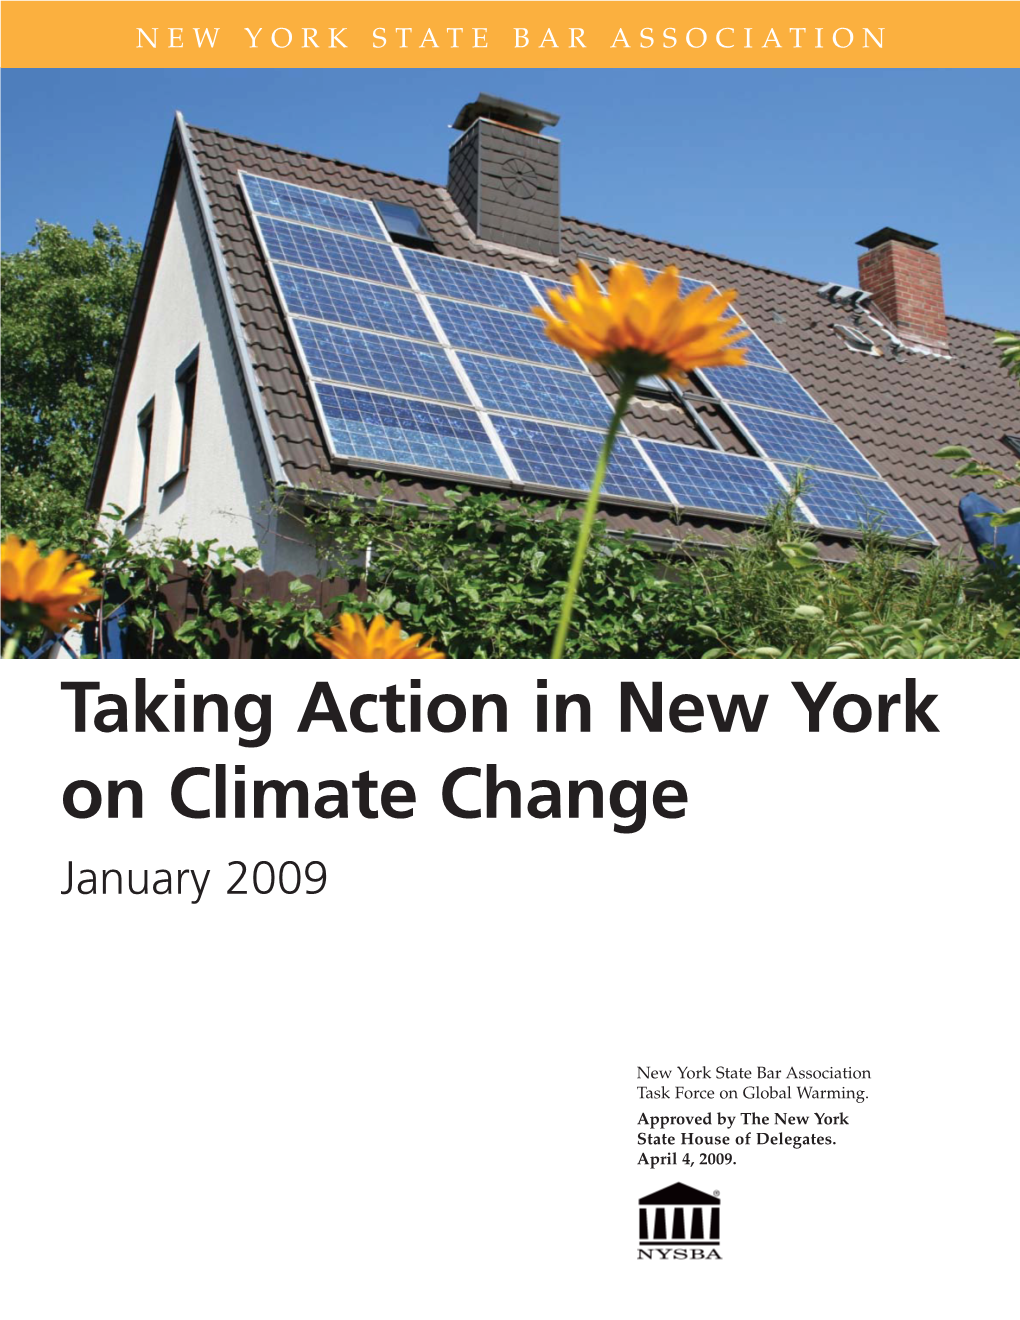 Taking Action in New York on Climate Change January 2009